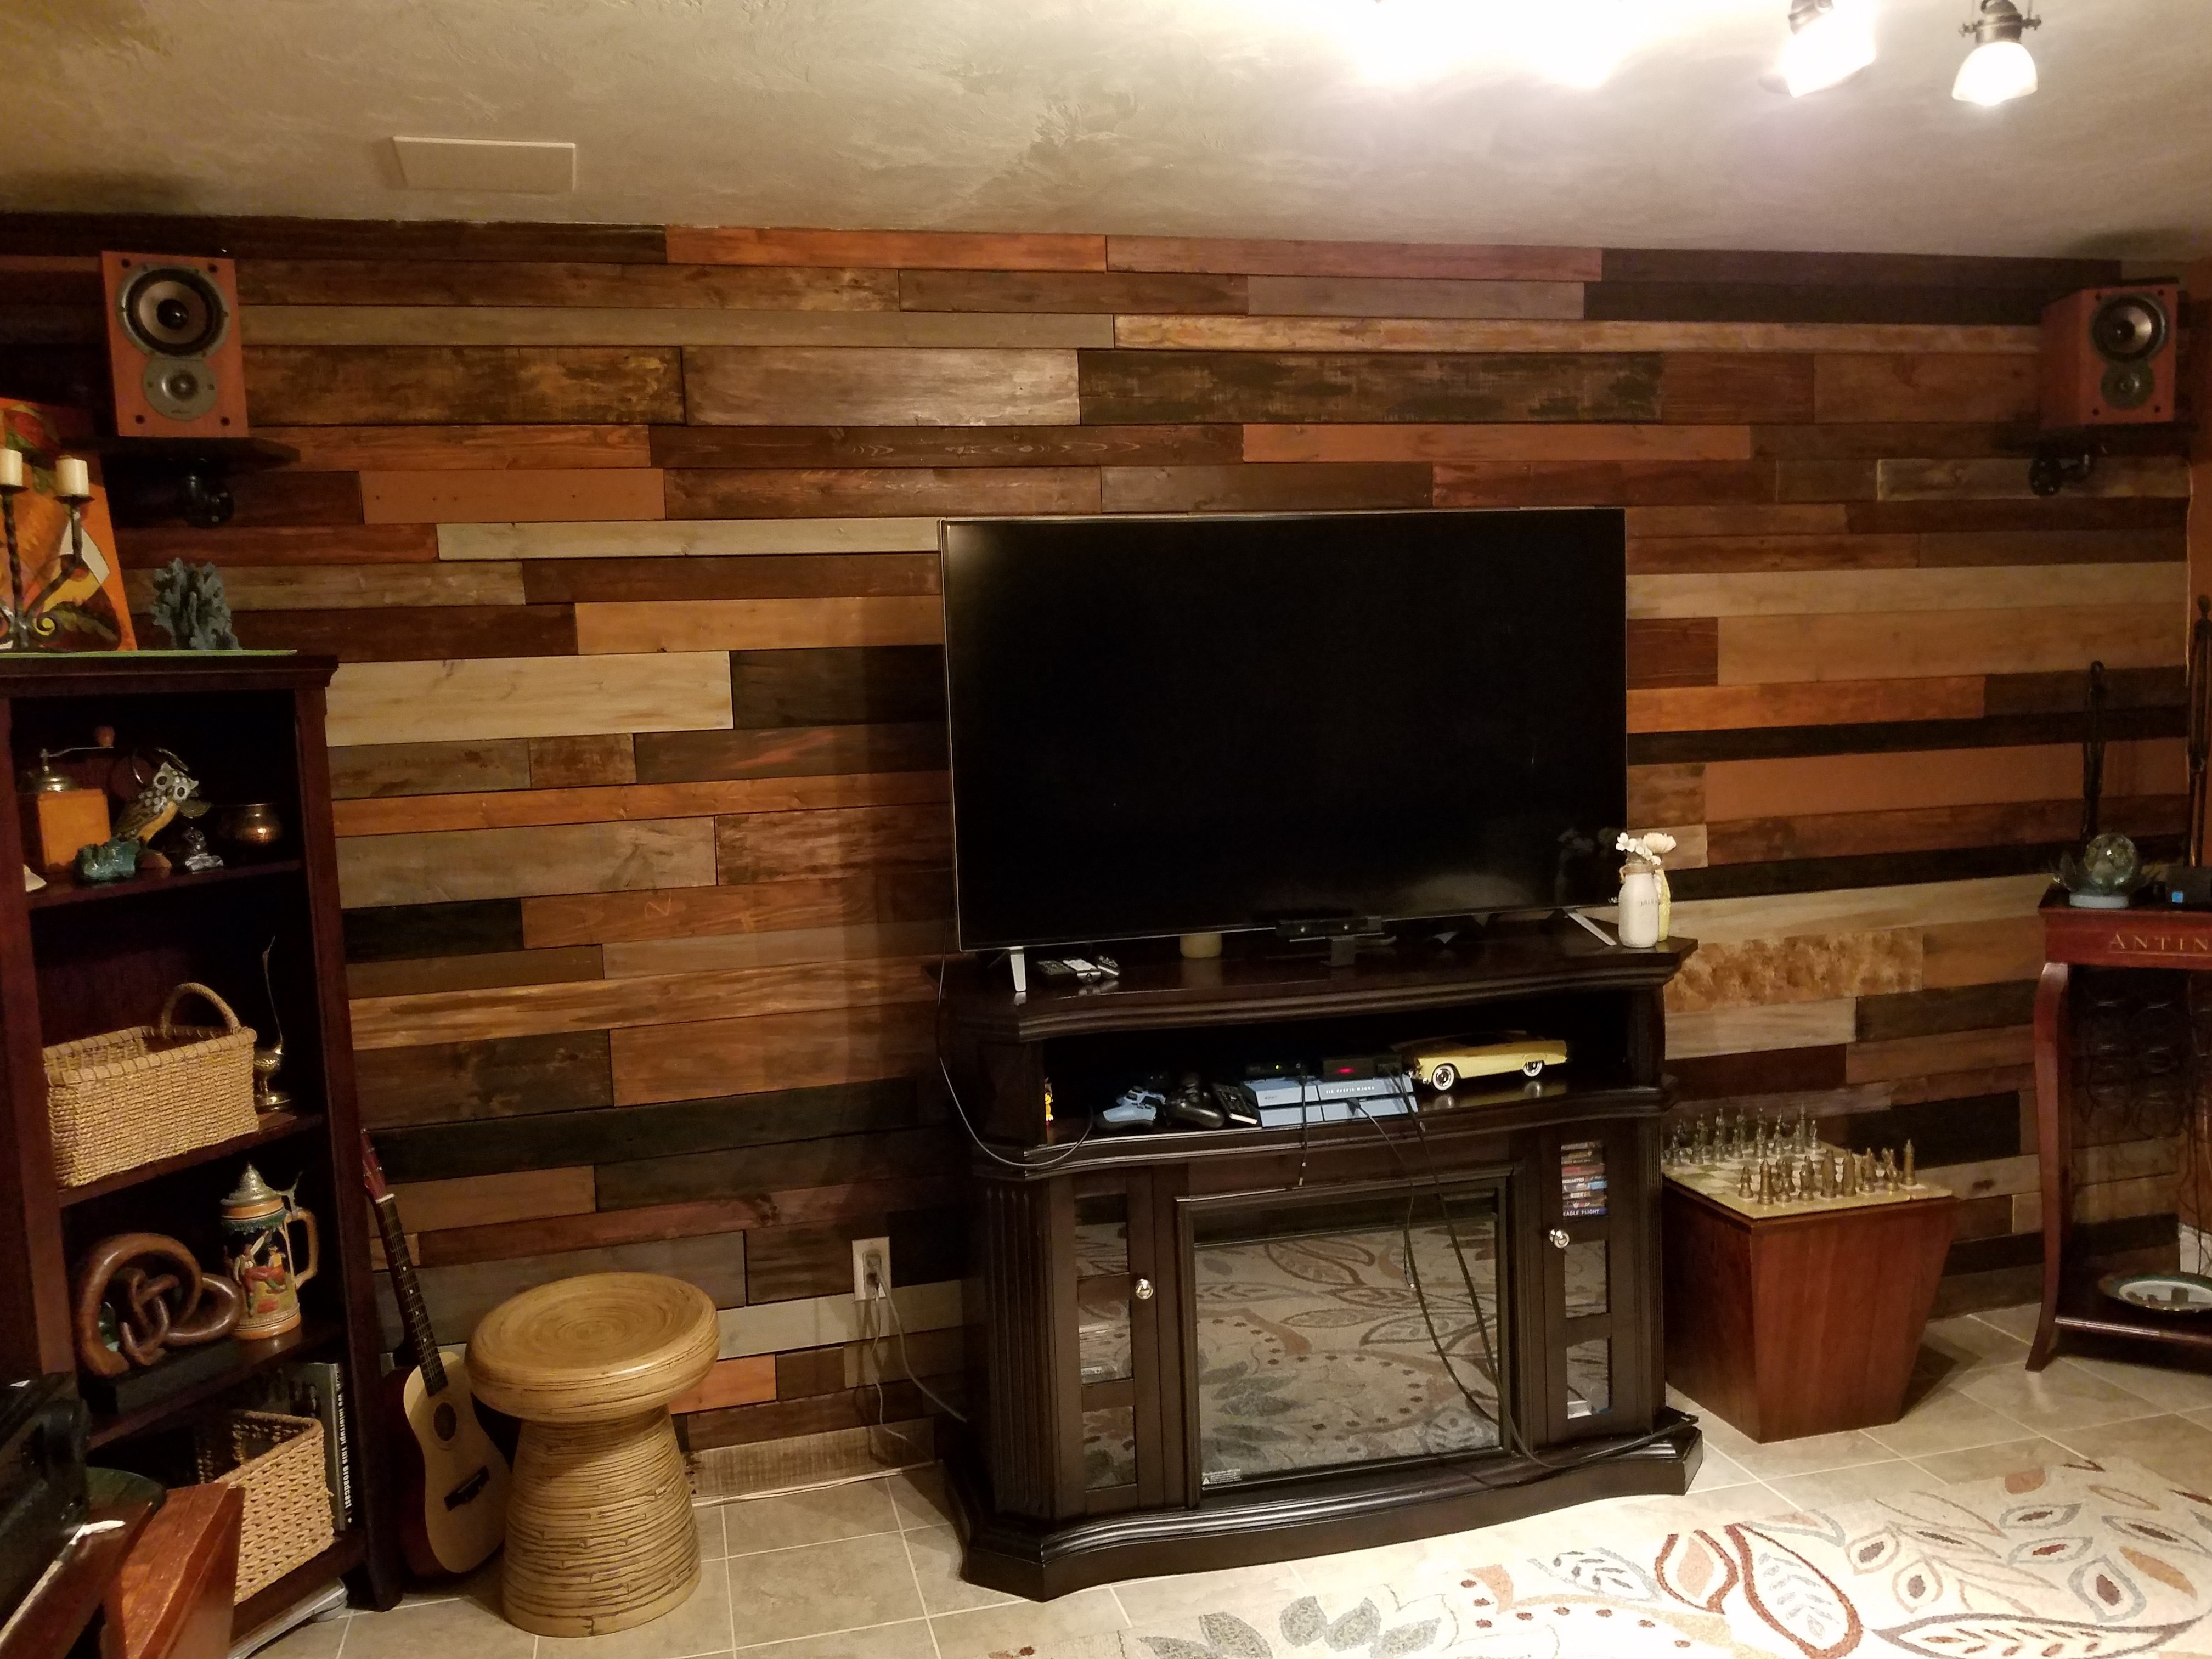 Reclaimed Wood Bar And Pallet Wall Basement Renovation Ryobi Nation Projects